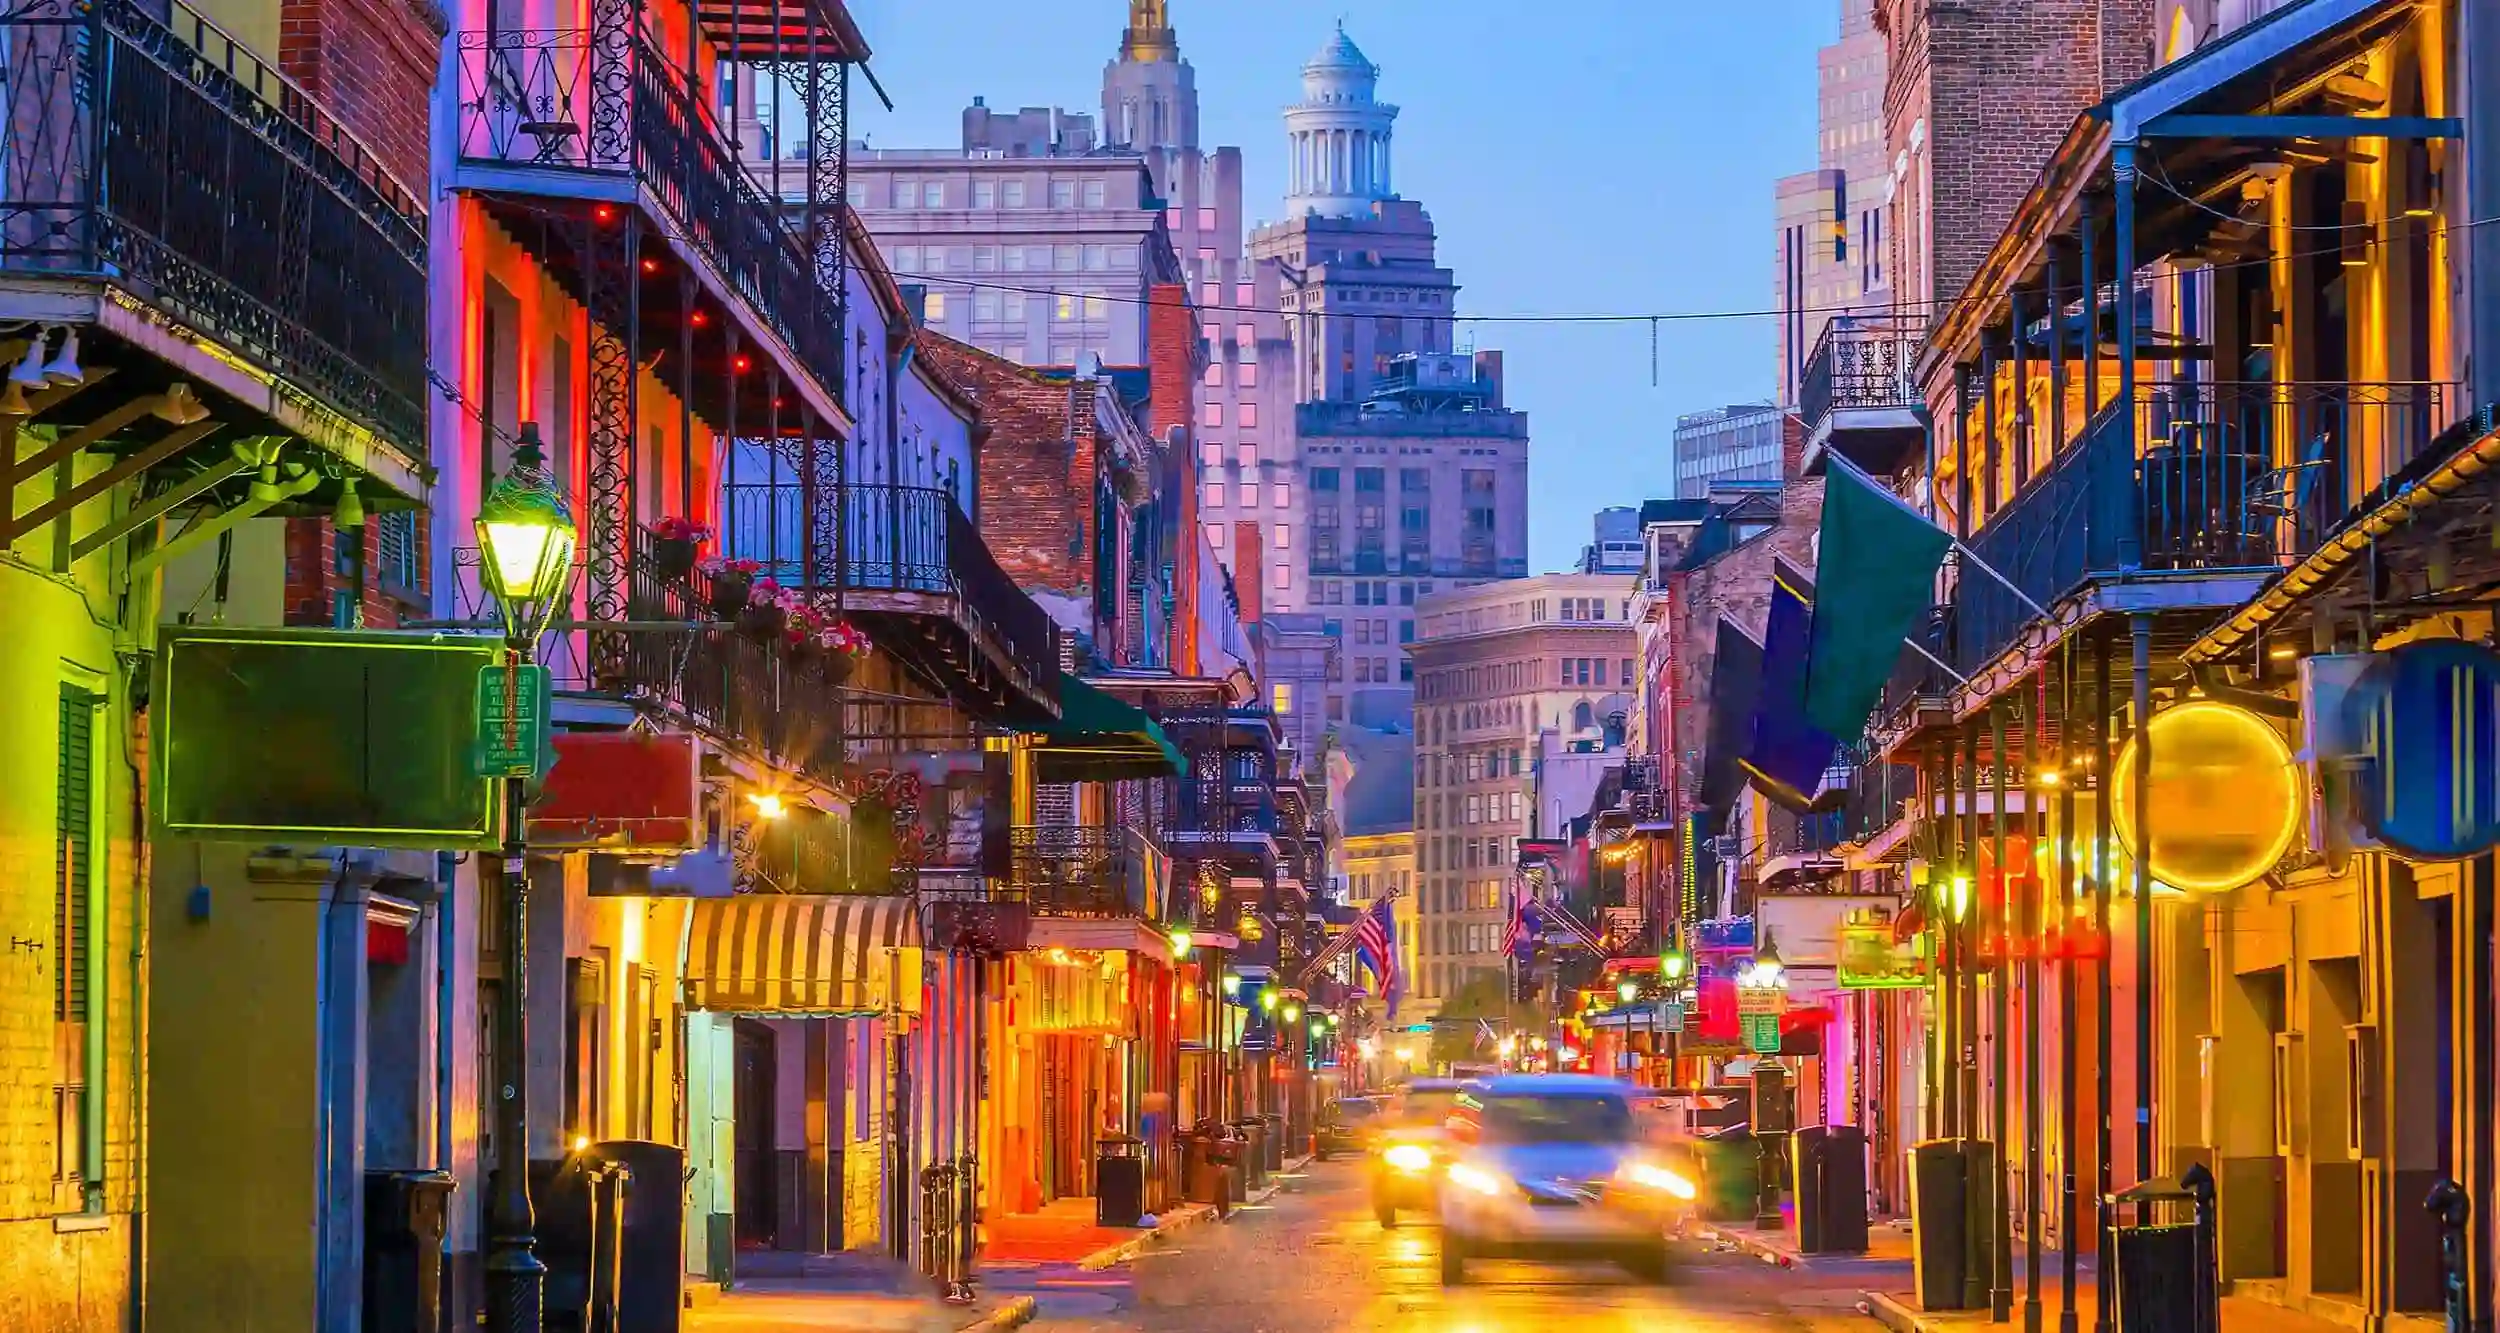 15-Unique-Off-The-Beaten-Path-Things-to-Do-in-New-Orleans.webp